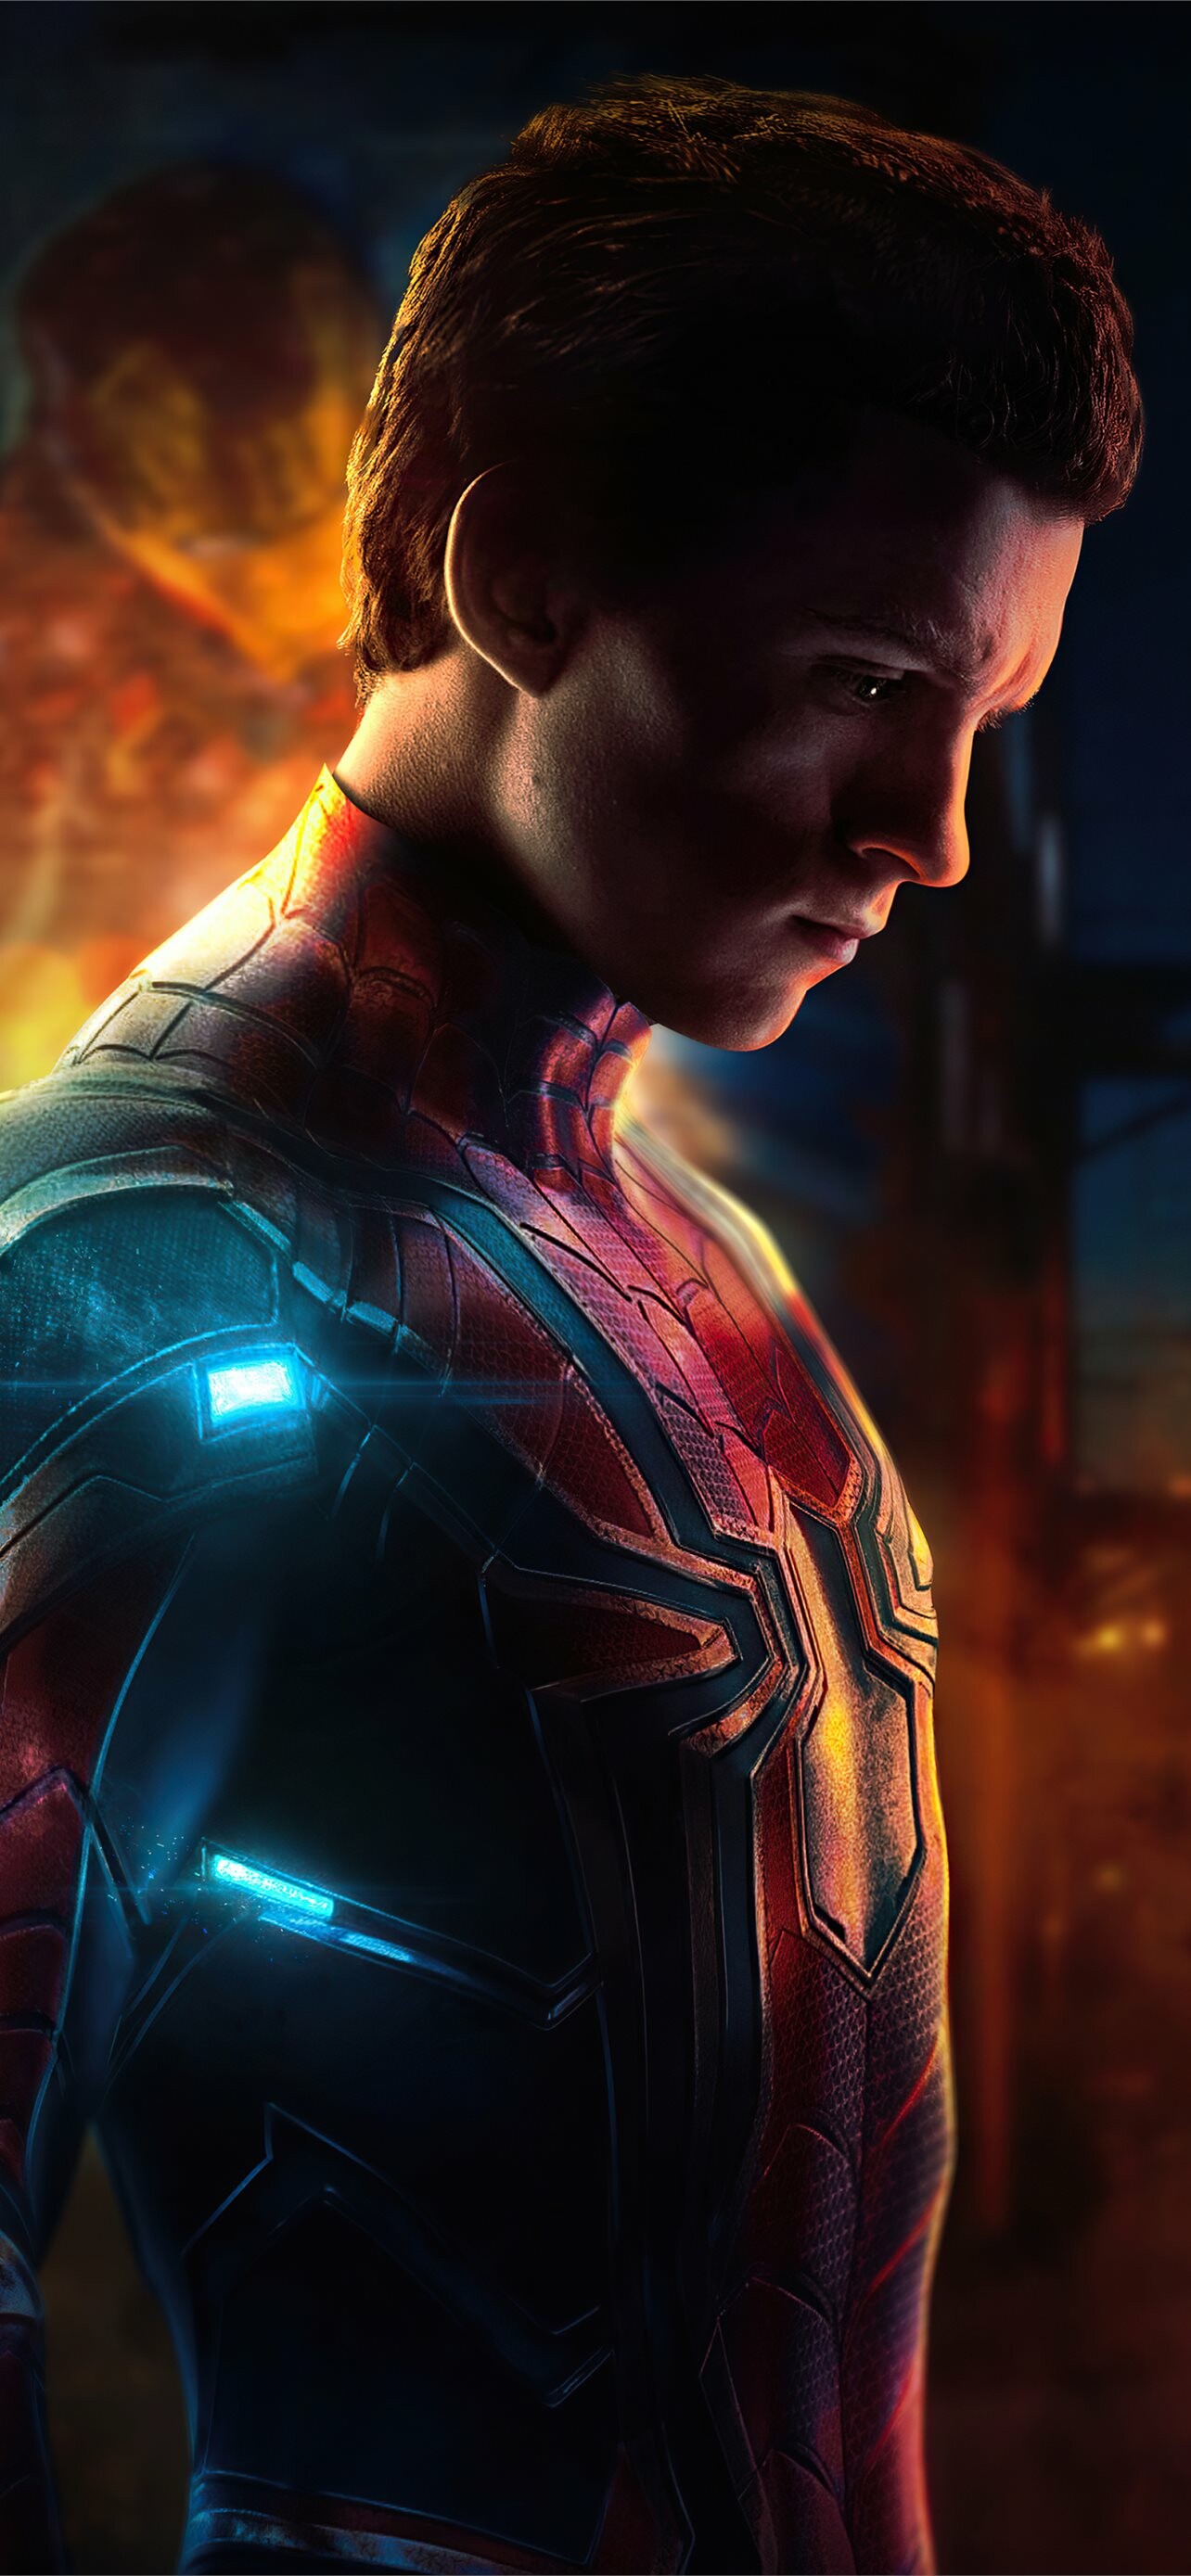 Tom Holland: Played Spider-Man in a 2021 American superhero film, Spider-Man: No Way Home. 1290x2780 HD Background.